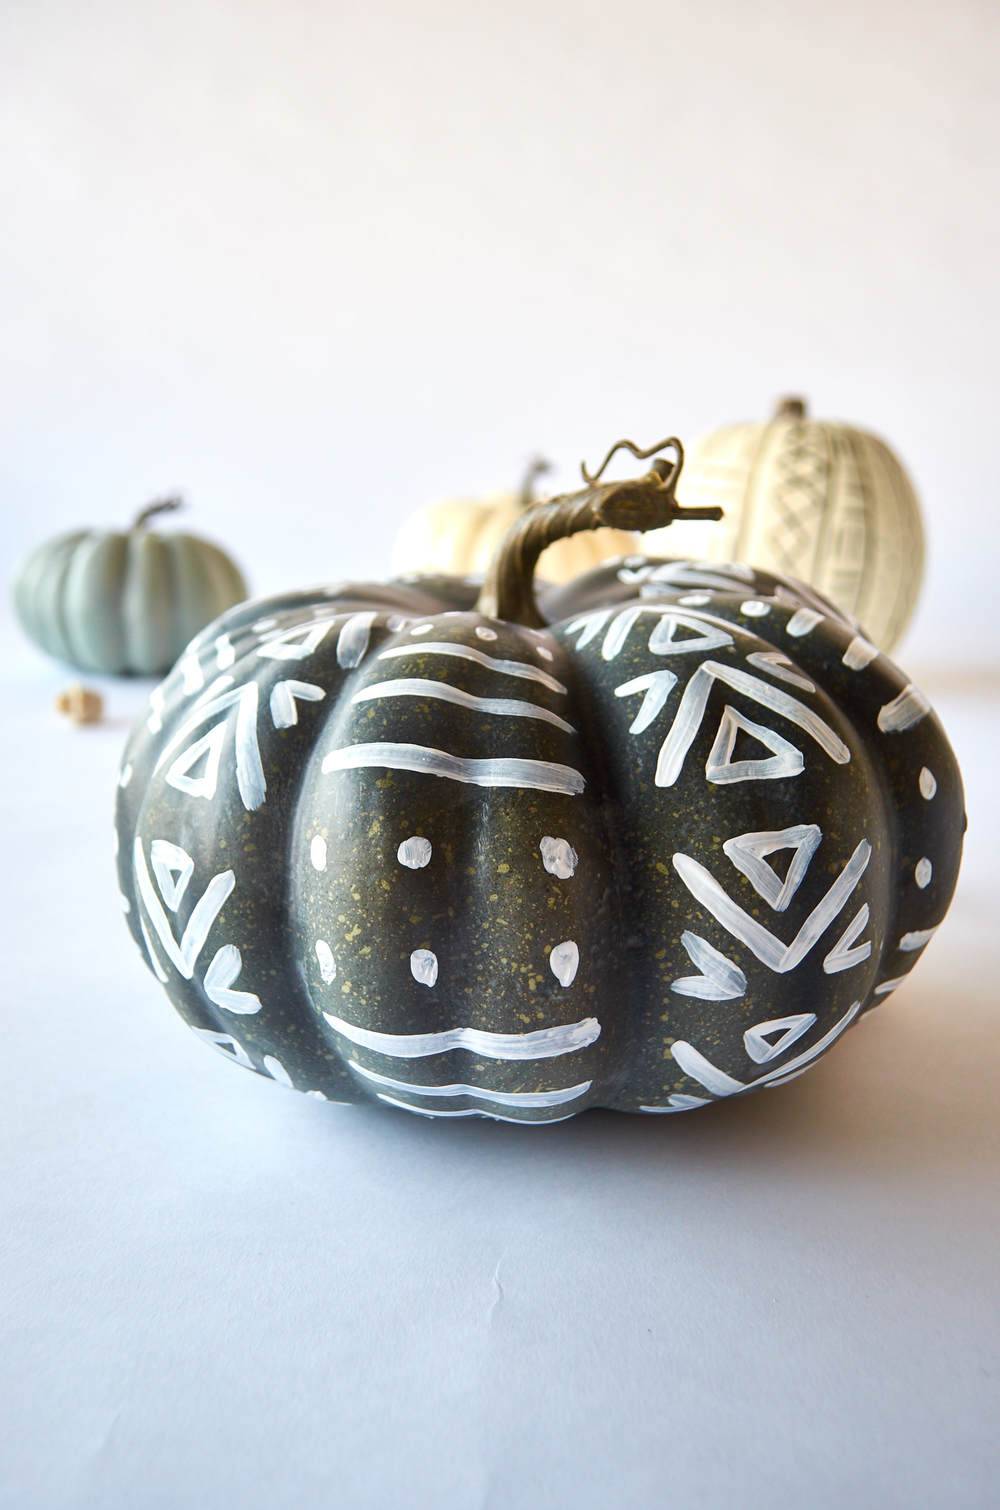 A pumpkin that has been decorated.